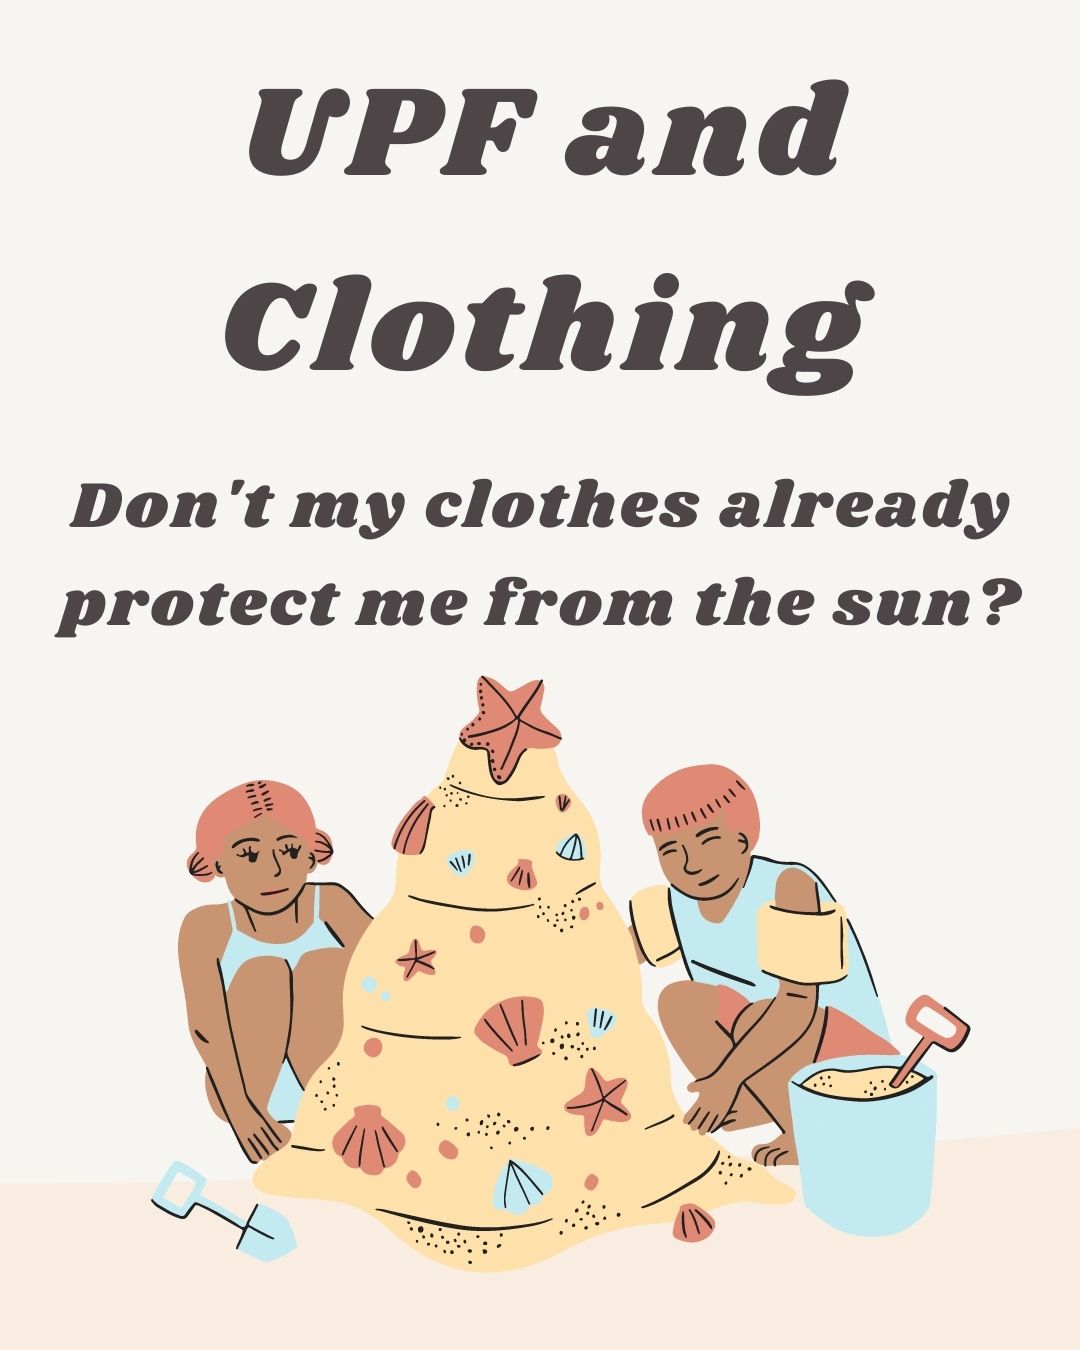 Do My Clothes Protect?